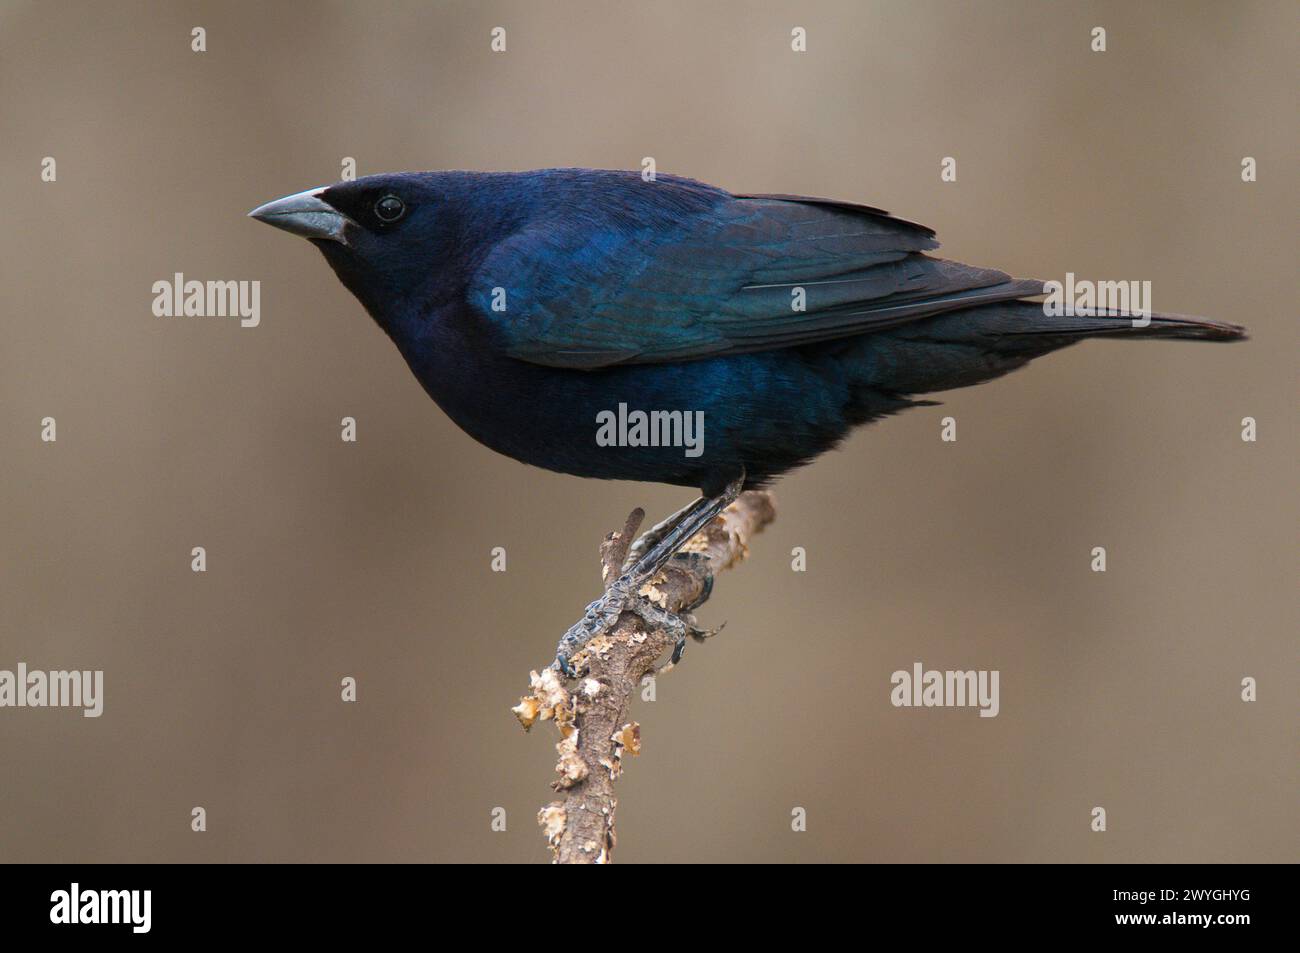 Shiny cowbird in Calden forest environment, La Pampa Province, Patagonia, Argentina. Stock Photo